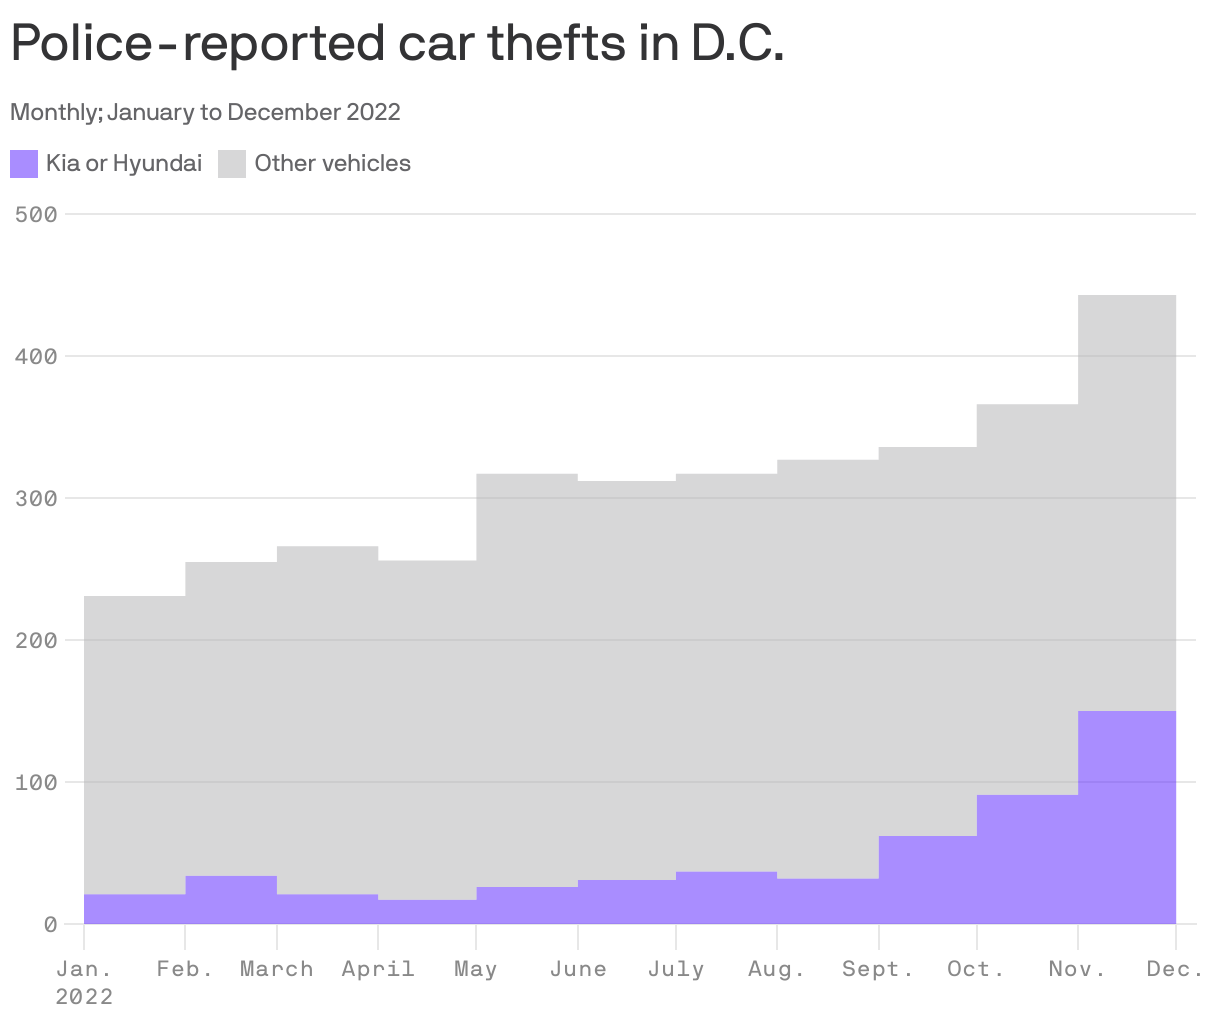 Police-reported car thefts in D.C.